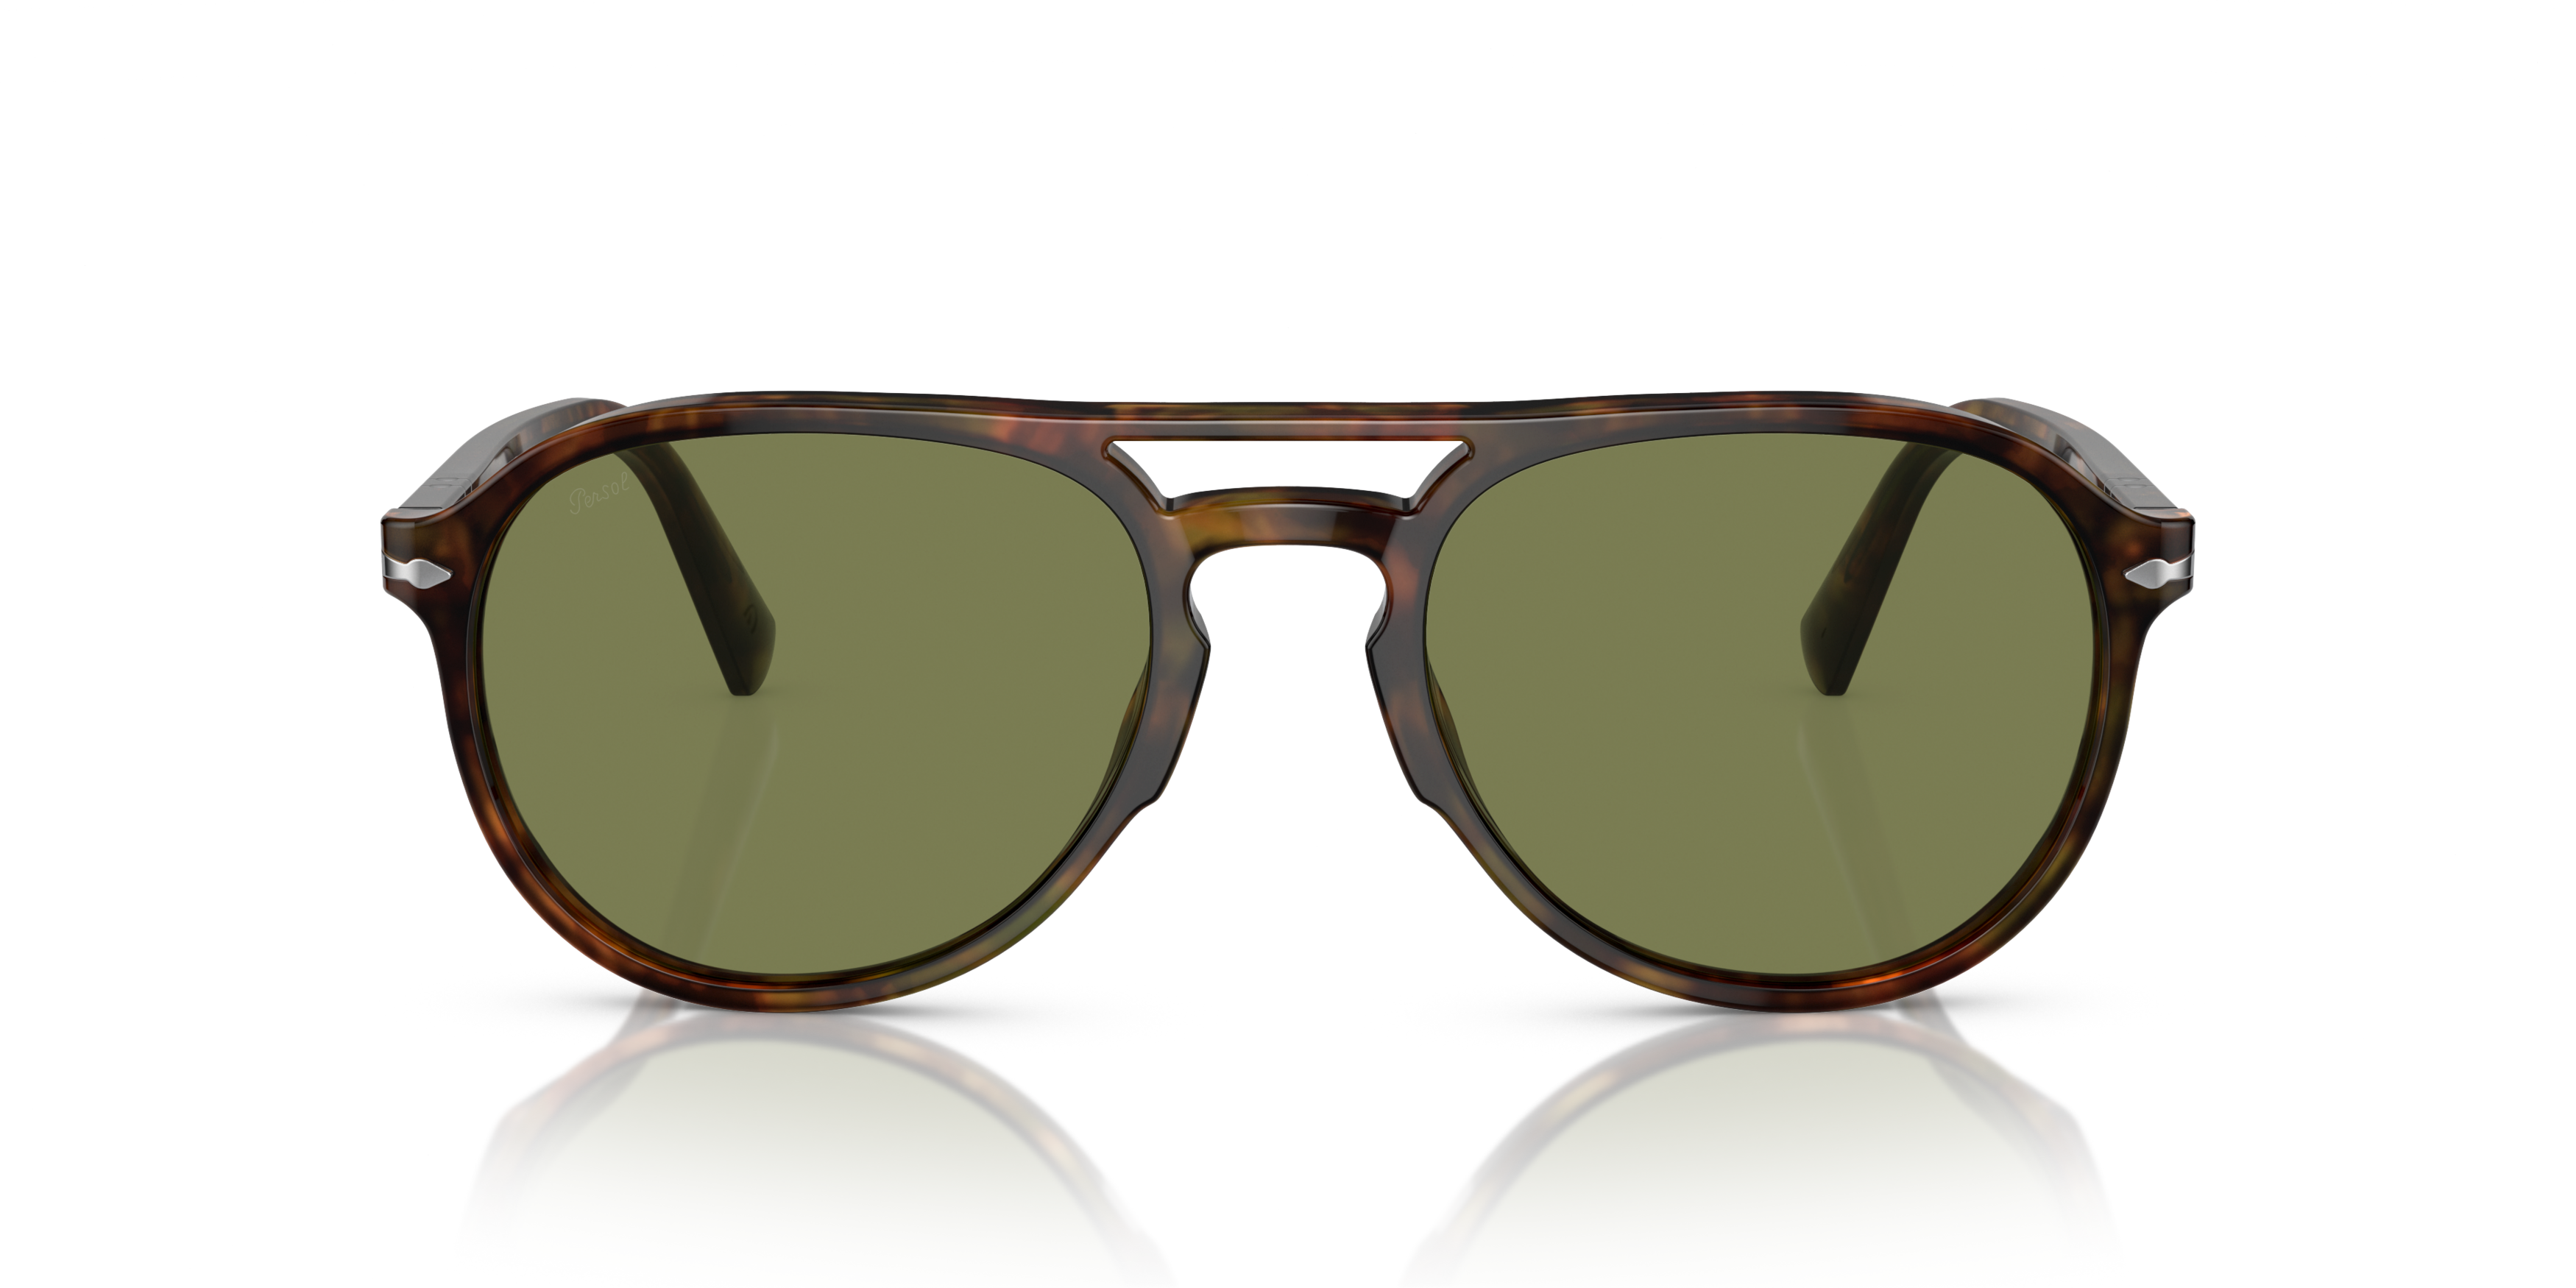 [products.image.front] Persol 0PO3235S